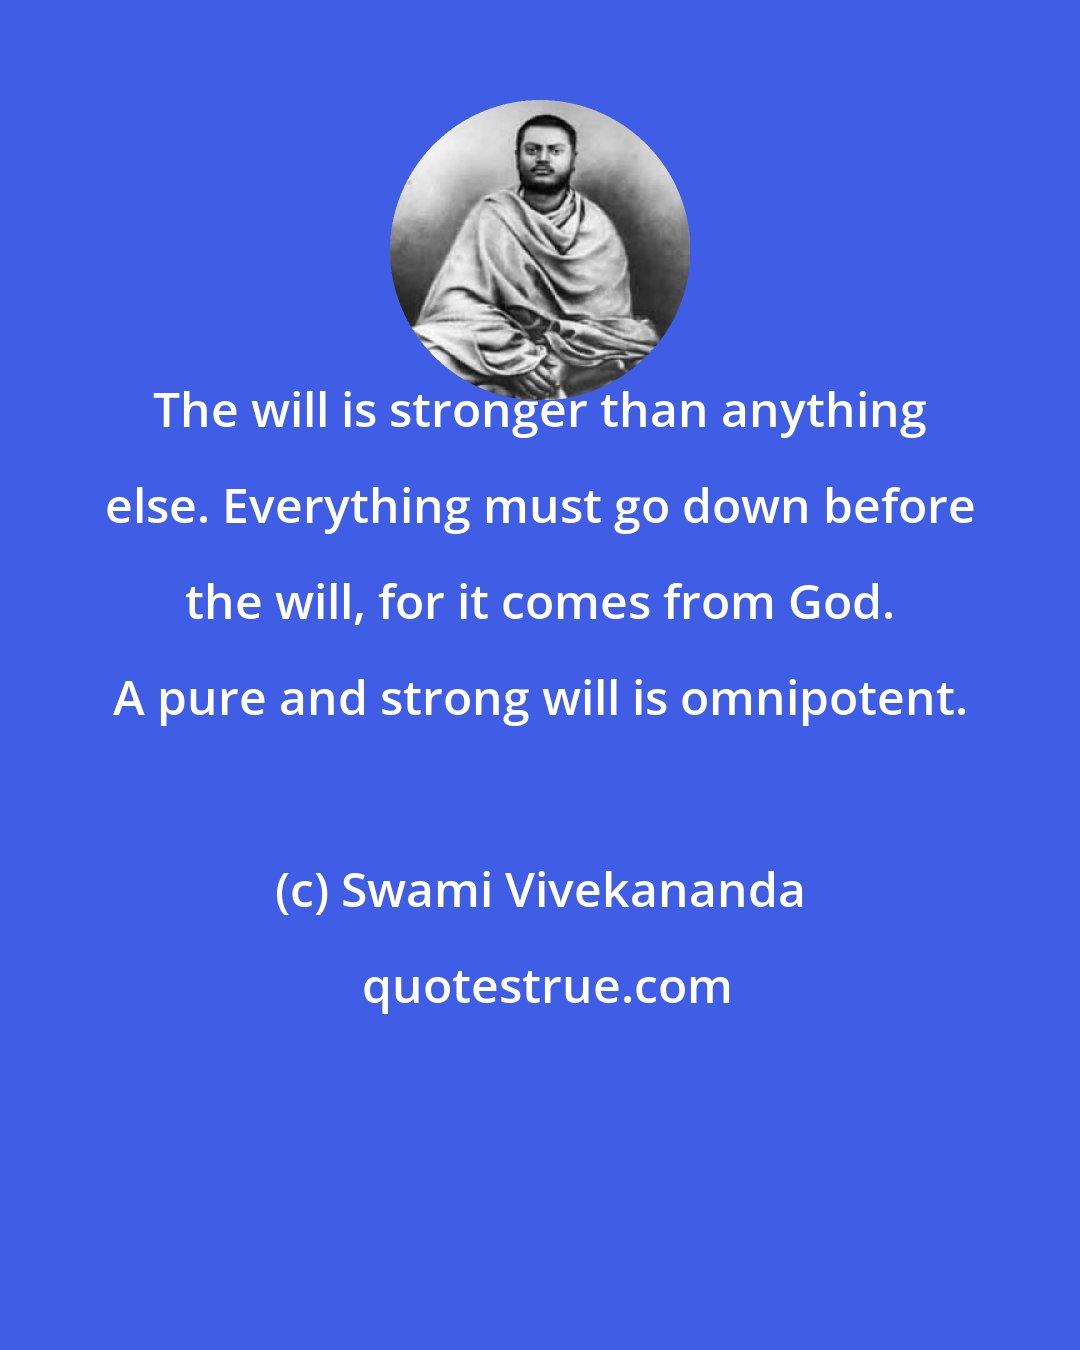 Swami Vivekananda: The will is stronger than anything else. Everything must go down before the will, for it comes from God. A pure and strong will is omnipotent.